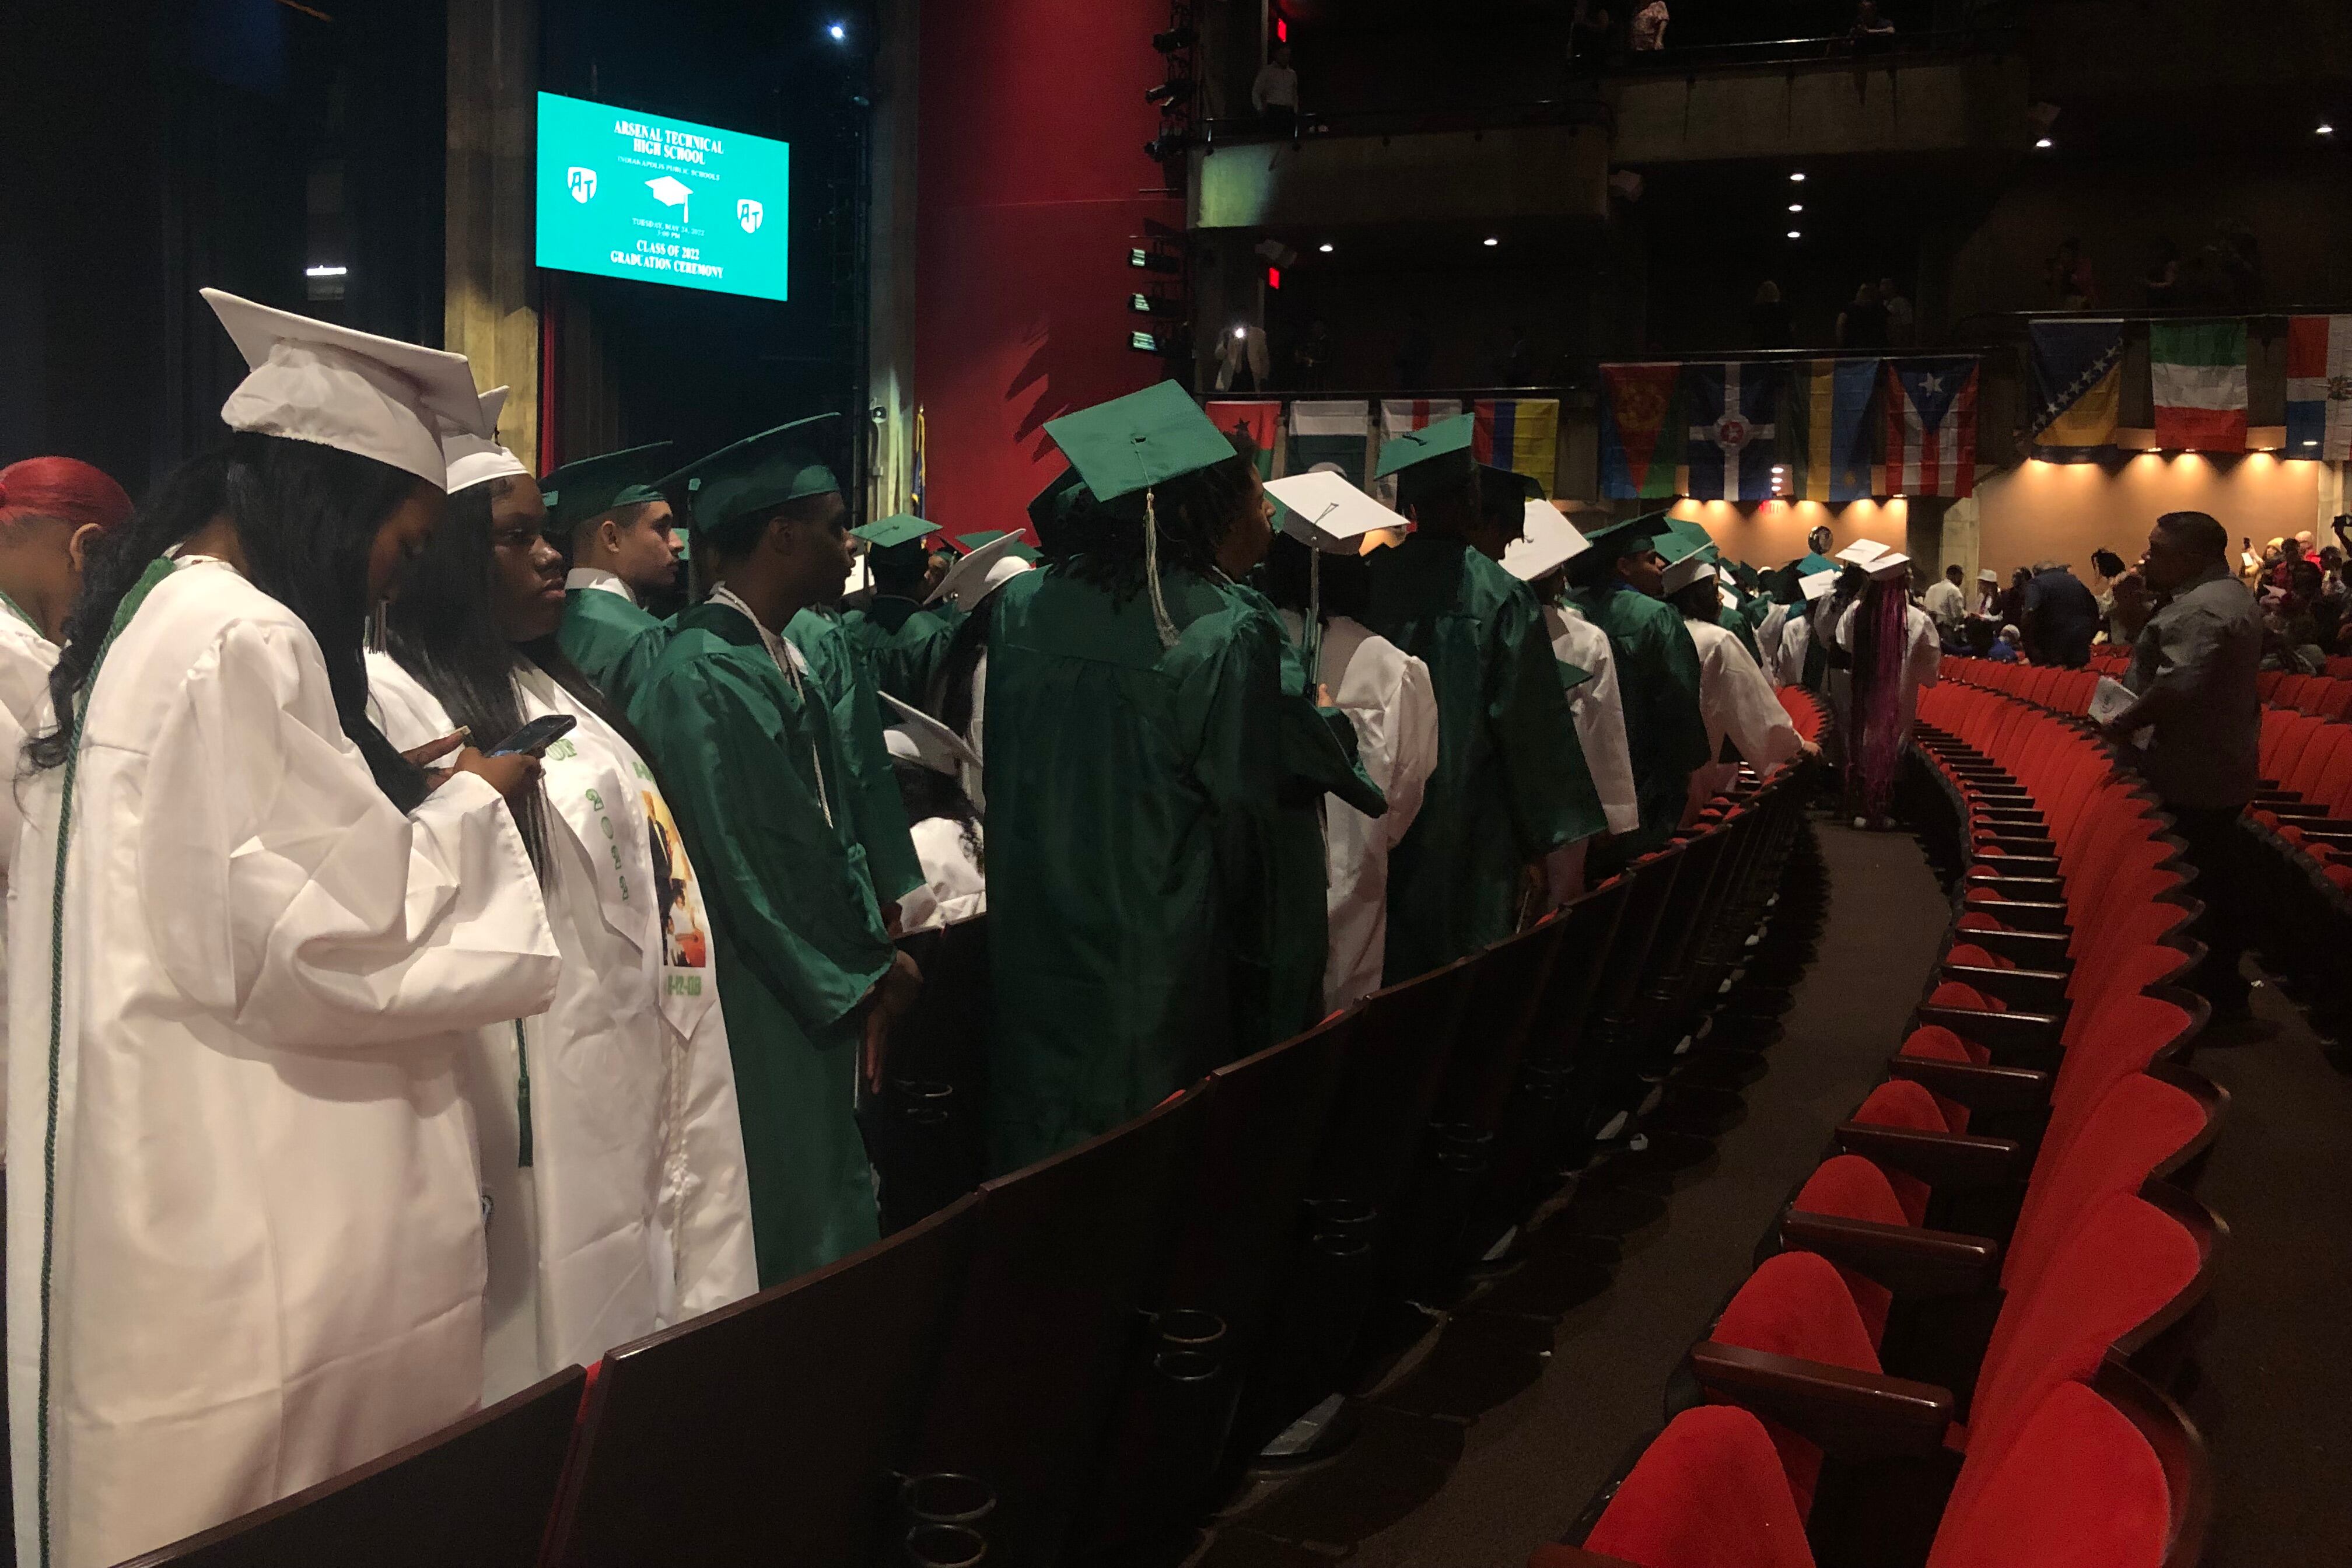 Students in both green and white graduation regalia stand in an auditorium in front of red theater seats.